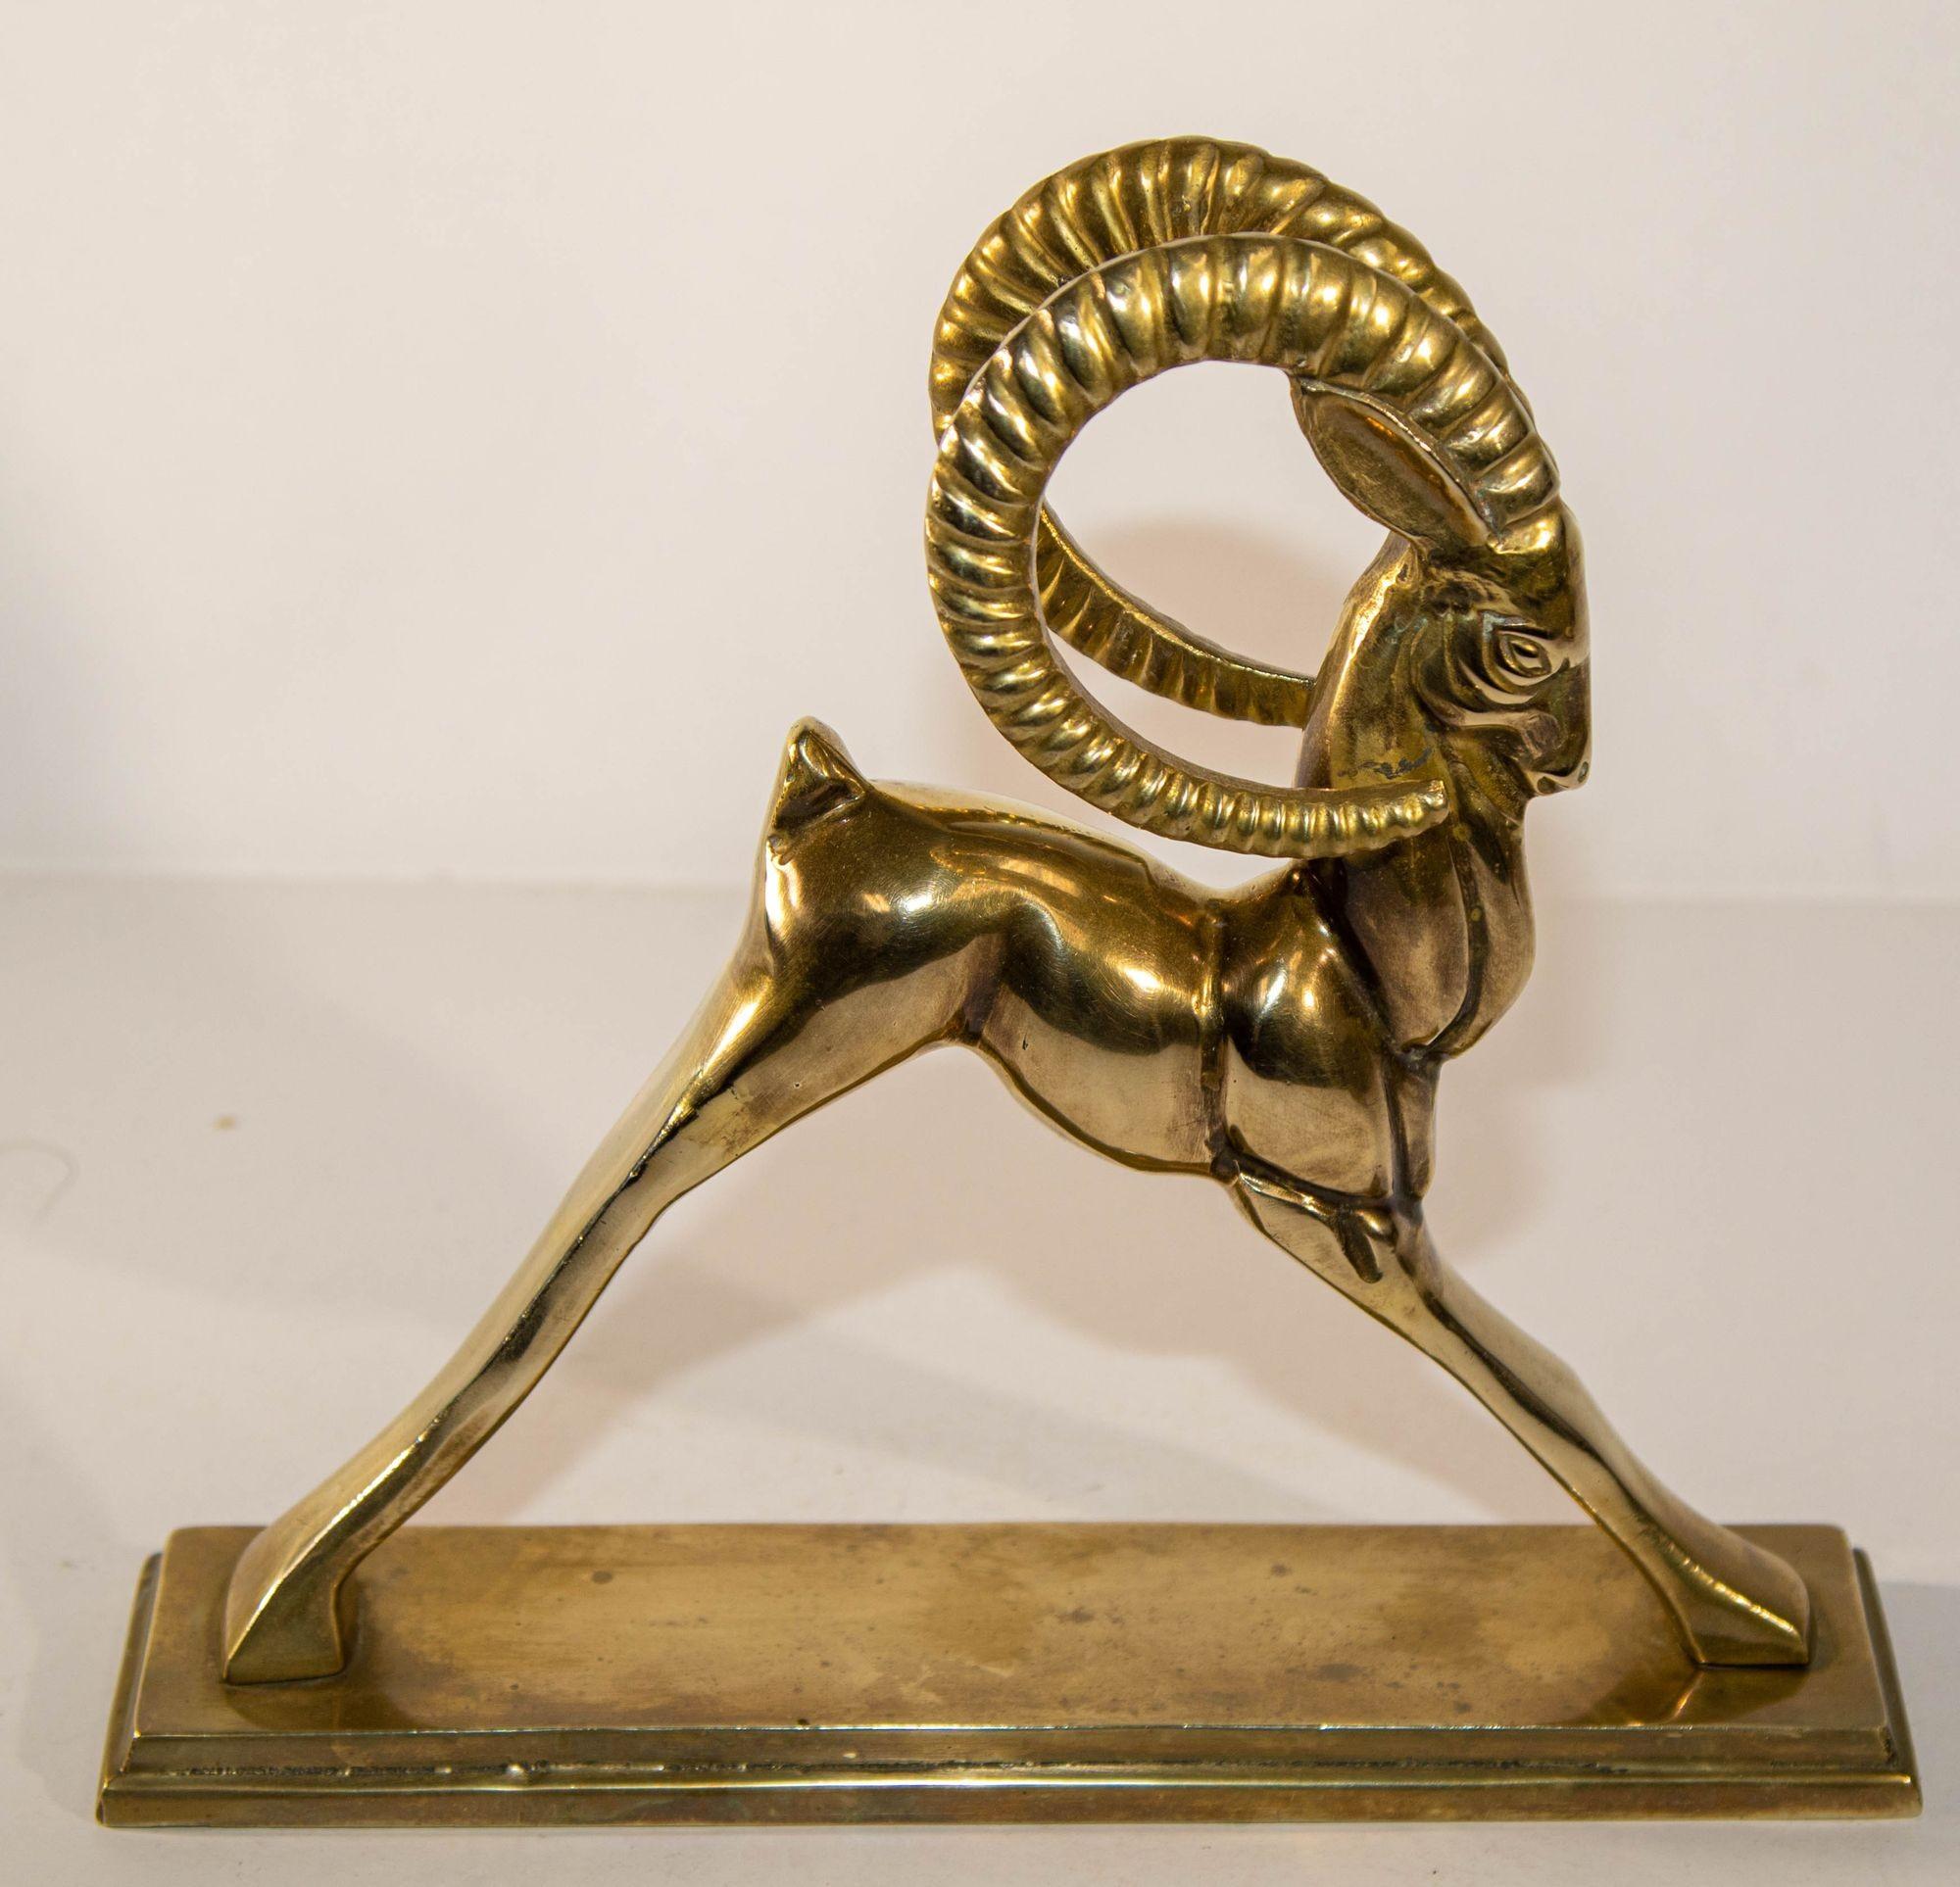 Vintage French Art Deco Style Sculpture of Brass Ibex Antelope For Sale 5